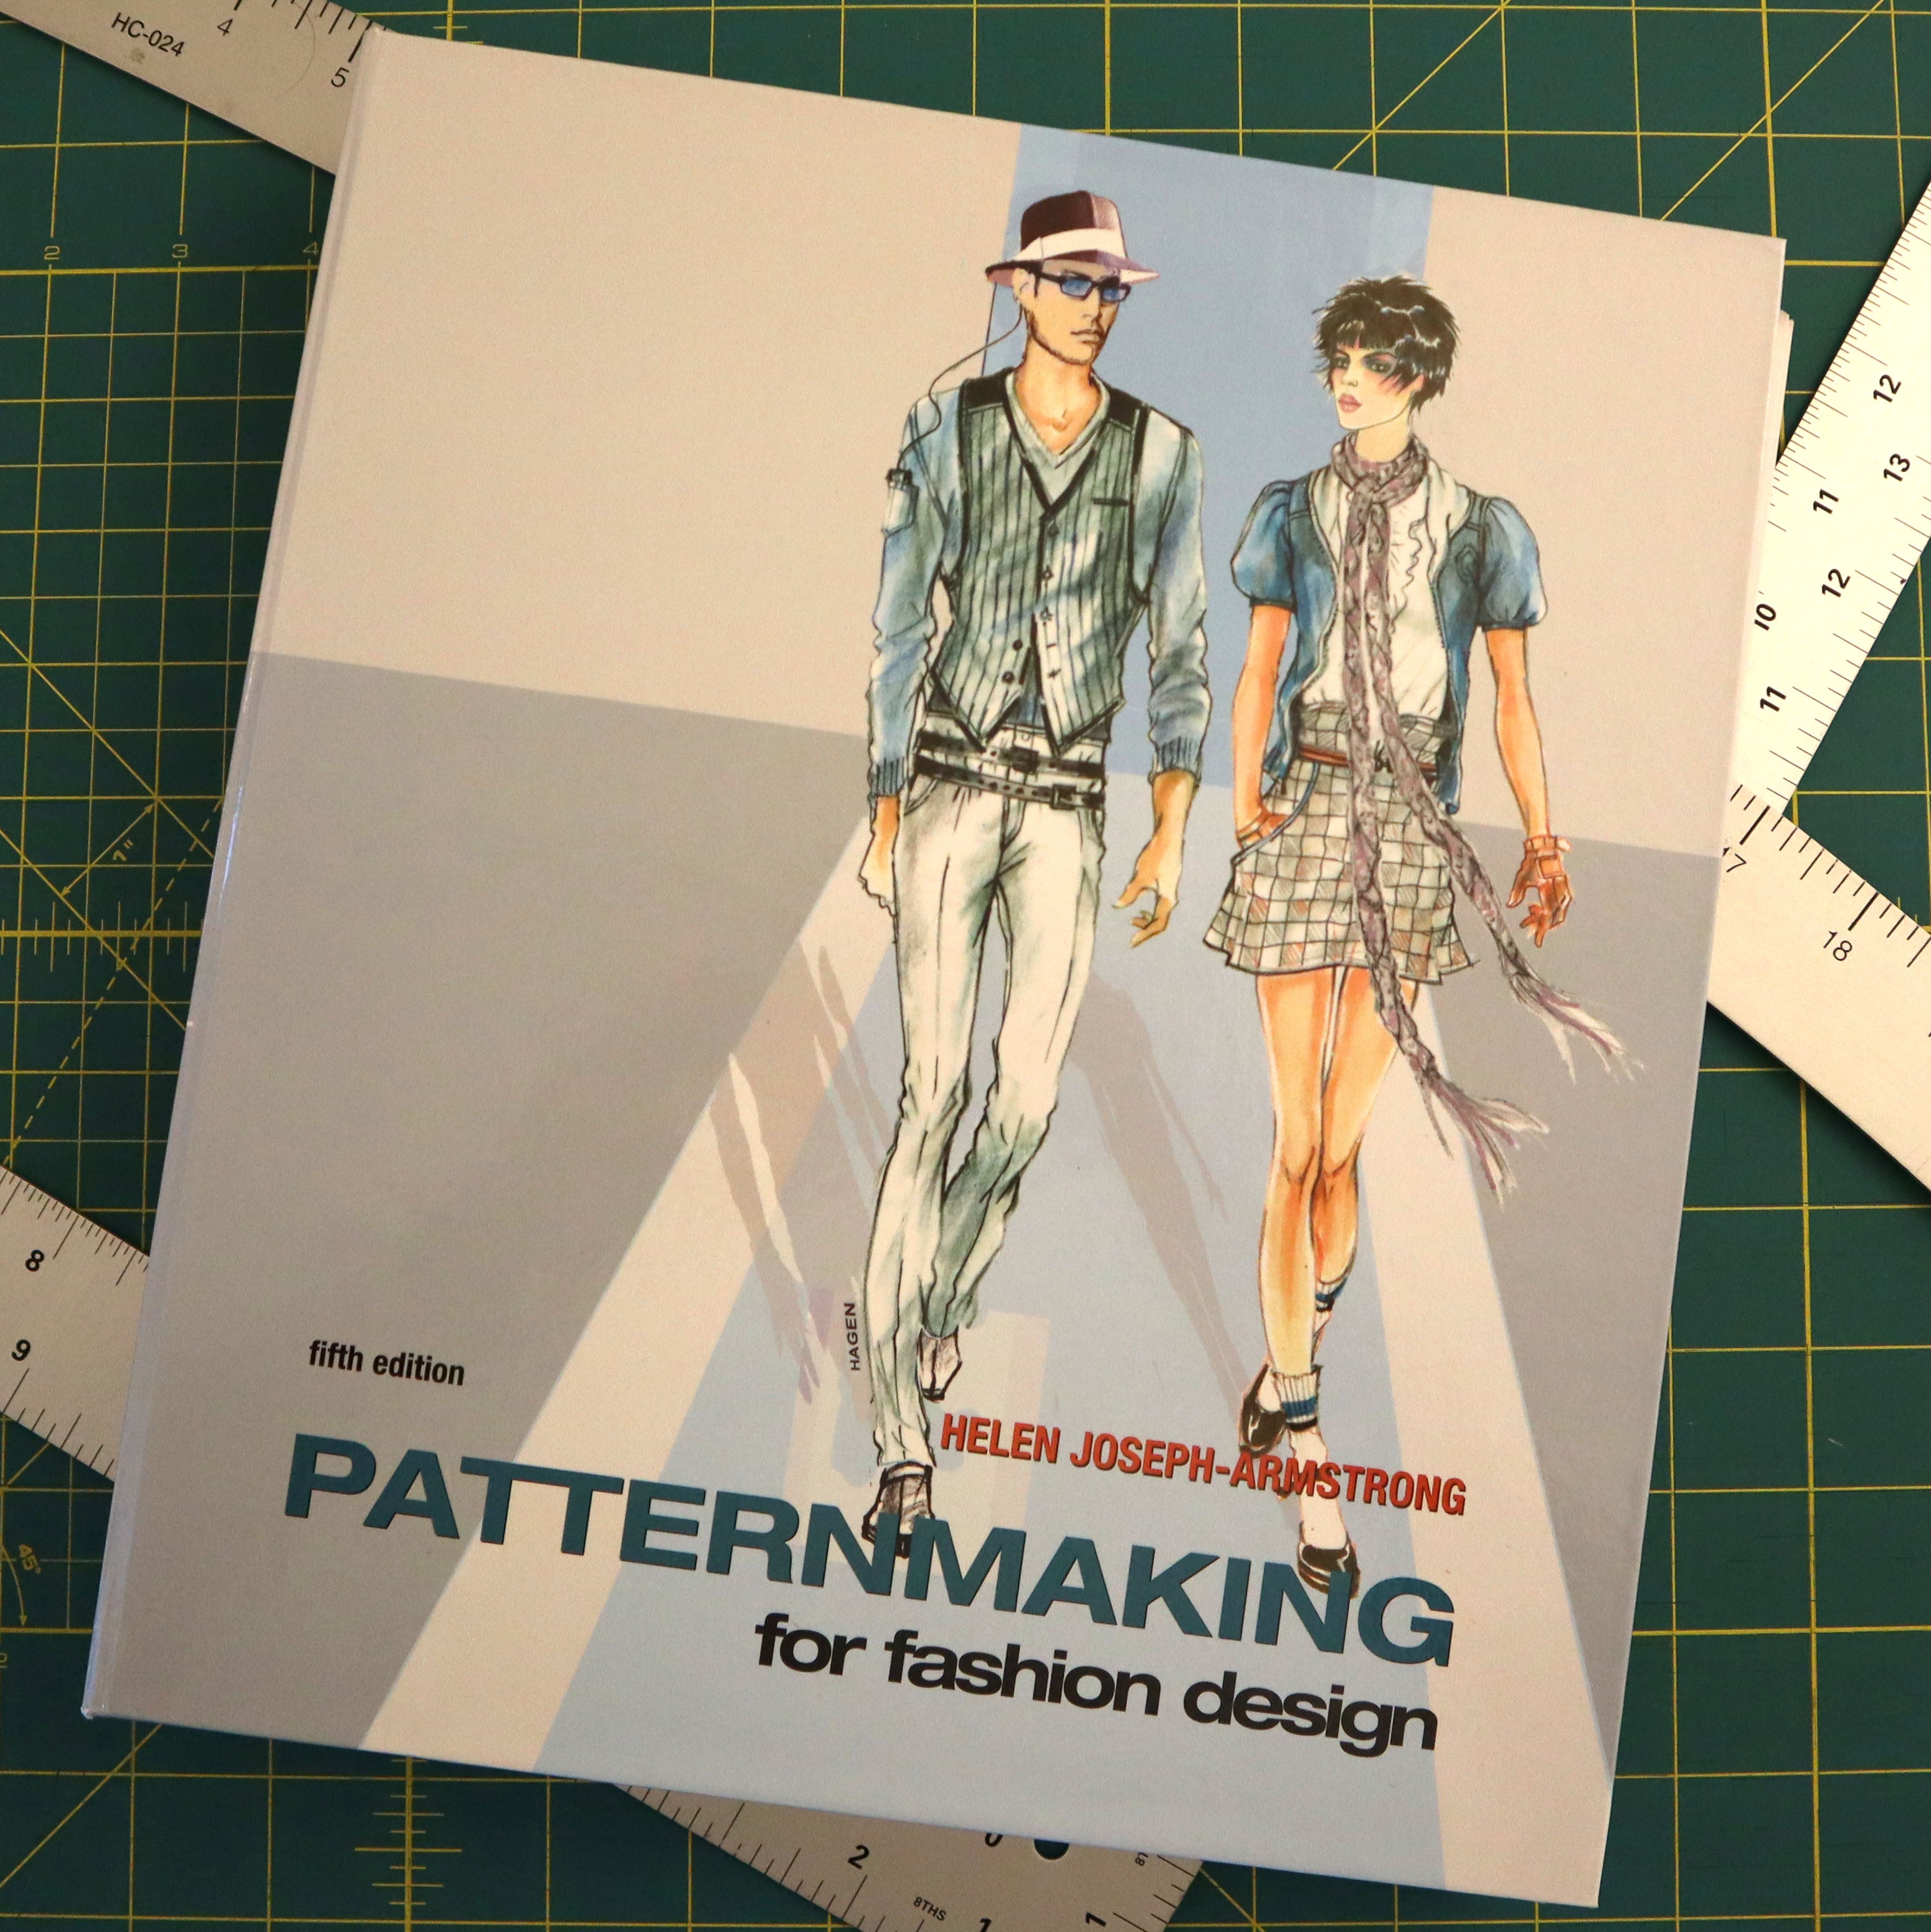 Book Review #3 - Patternmaking for Fashion Design by Helen Joseph-Armstrong